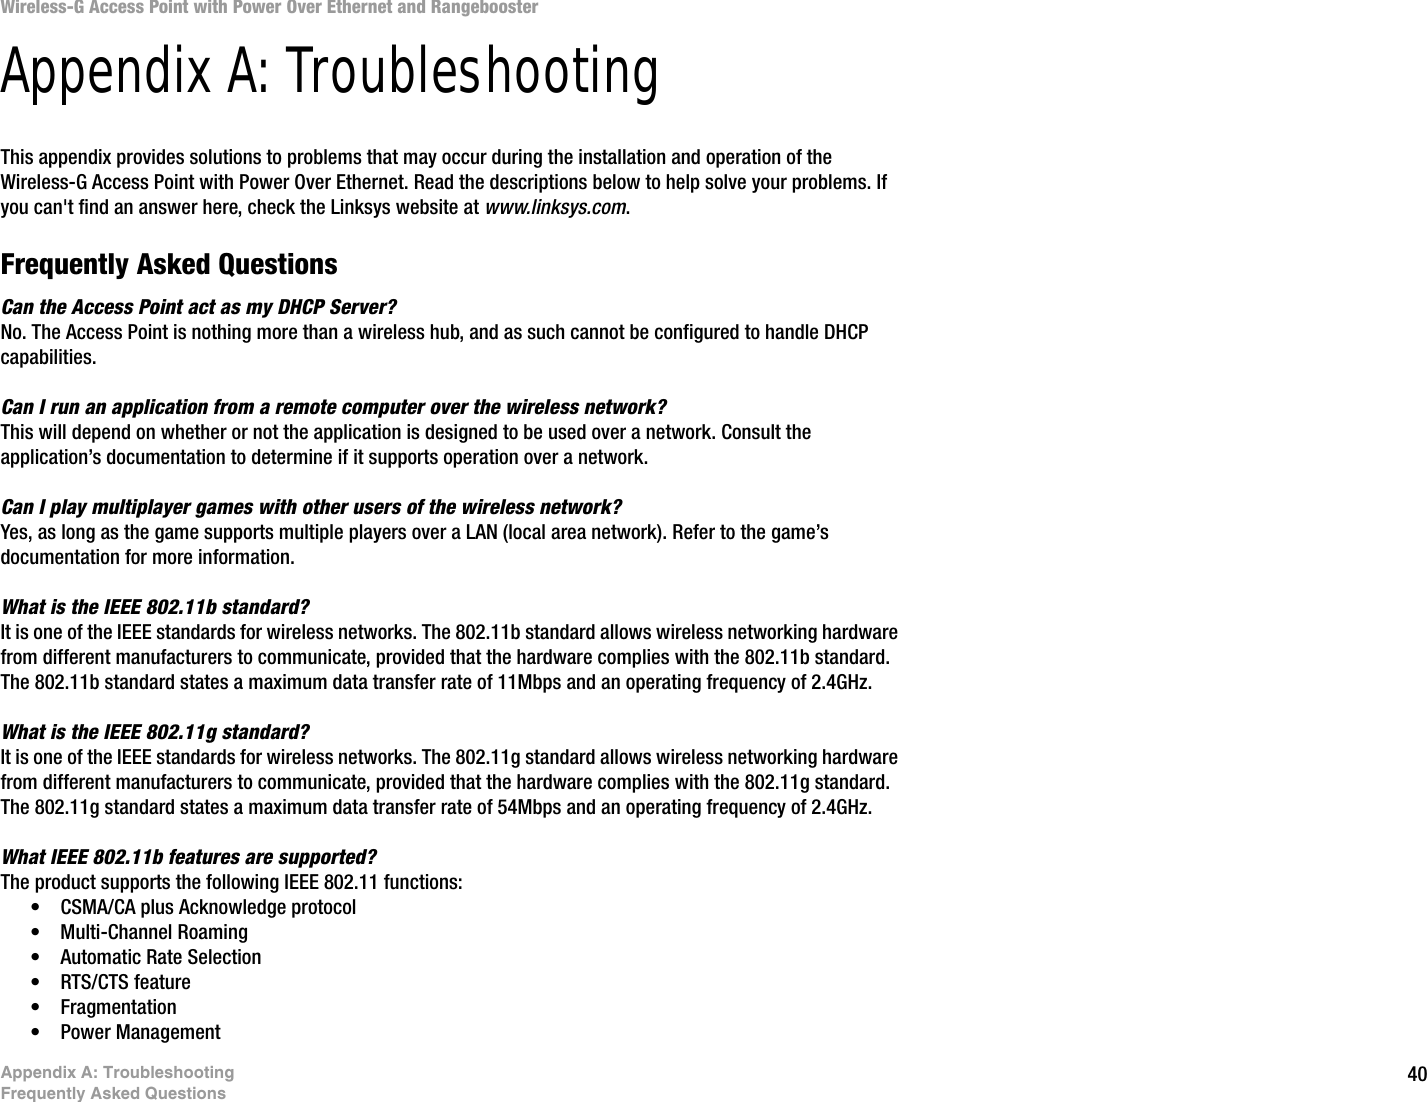 40Appendix A: TroubleshootingFrequently Asked QuestionsWireless-G Access Point with Power Over Ethernet and RangeboosterAppendix A: TroubleshootingThis appendix provides solutions to problems that may occur during the installation and operation of the Wireless-G Access Point with Power Over Ethernet. Read the descriptions below to help solve your problems. If you can&apos;t find an answer here, check the Linksys website at www.linksys.com.Frequently Asked QuestionsCan the Access Point act as my DHCP Server?No. The Access Point is nothing more than a wireless hub, and as such cannot be configured to handle DHCP capabilities.Can I run an application from a remote computer over the wireless network?This will depend on whether or not the application is designed to be used over a network. Consult the application’s documentation to determine if it supports operation over a network.Can I play multiplayer games with other users of the wireless network?Yes, as long as the game supports multiple players over a LAN (local area network). Refer to the game’s documentation for more information.What is the IEEE 802.11b standard?It is one of the IEEE standards for wireless networks. The 802.11b standard allows wireless networking hardware from different manufacturers to communicate, provided that the hardware complies with the 802.11b standard. The 802.11b standard states a maximum data transfer rate of 11Mbps and an operating frequency of 2.4GHz.What is the IEEE 802.11g standard?It is one of the IEEE standards for wireless networks. The 802.11g standard allows wireless networking hardware from different manufacturers to communicate, provided that the hardware complies with the 802.11g standard. The 802.11g standard states a maximum data transfer rate of 54Mbps and an operating frequency of 2.4GHz.What IEEE 802.11b features are supported?The product supports the following IEEE 802.11 functions: • CSMA/CA plus Acknowledge protocol • Multi-Channel Roaming • Automatic Rate Selection • RTS/CTS feature • Fragmentation • Power Management  